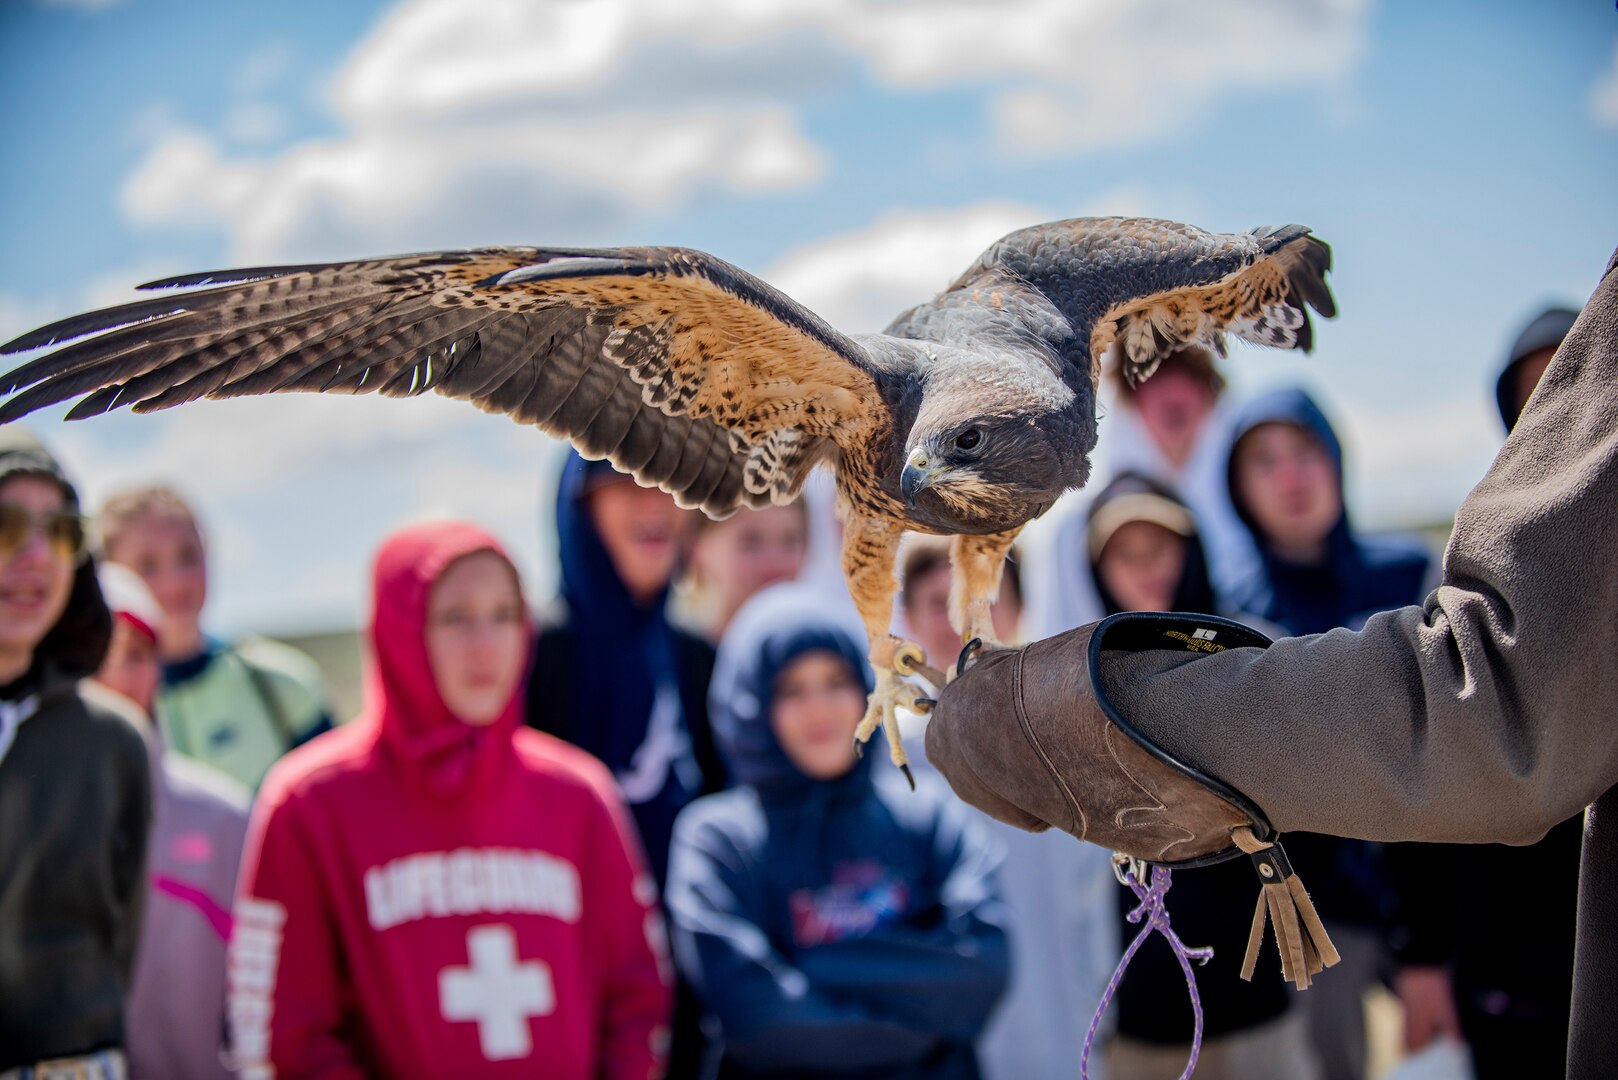 More than 180 seventh graders experienced science through a hands-on field trip at the Morley Nelson Snake River Birds of Prey National Conservation Area at the Idaho National Guard’s Orchard Combat Training Center April 28-29, 2022. The NCA is home to the largest and most diverse population of breeding raptors in North America and one of the only places where military training, extensive research, public land use and livestock coexist on the same land.